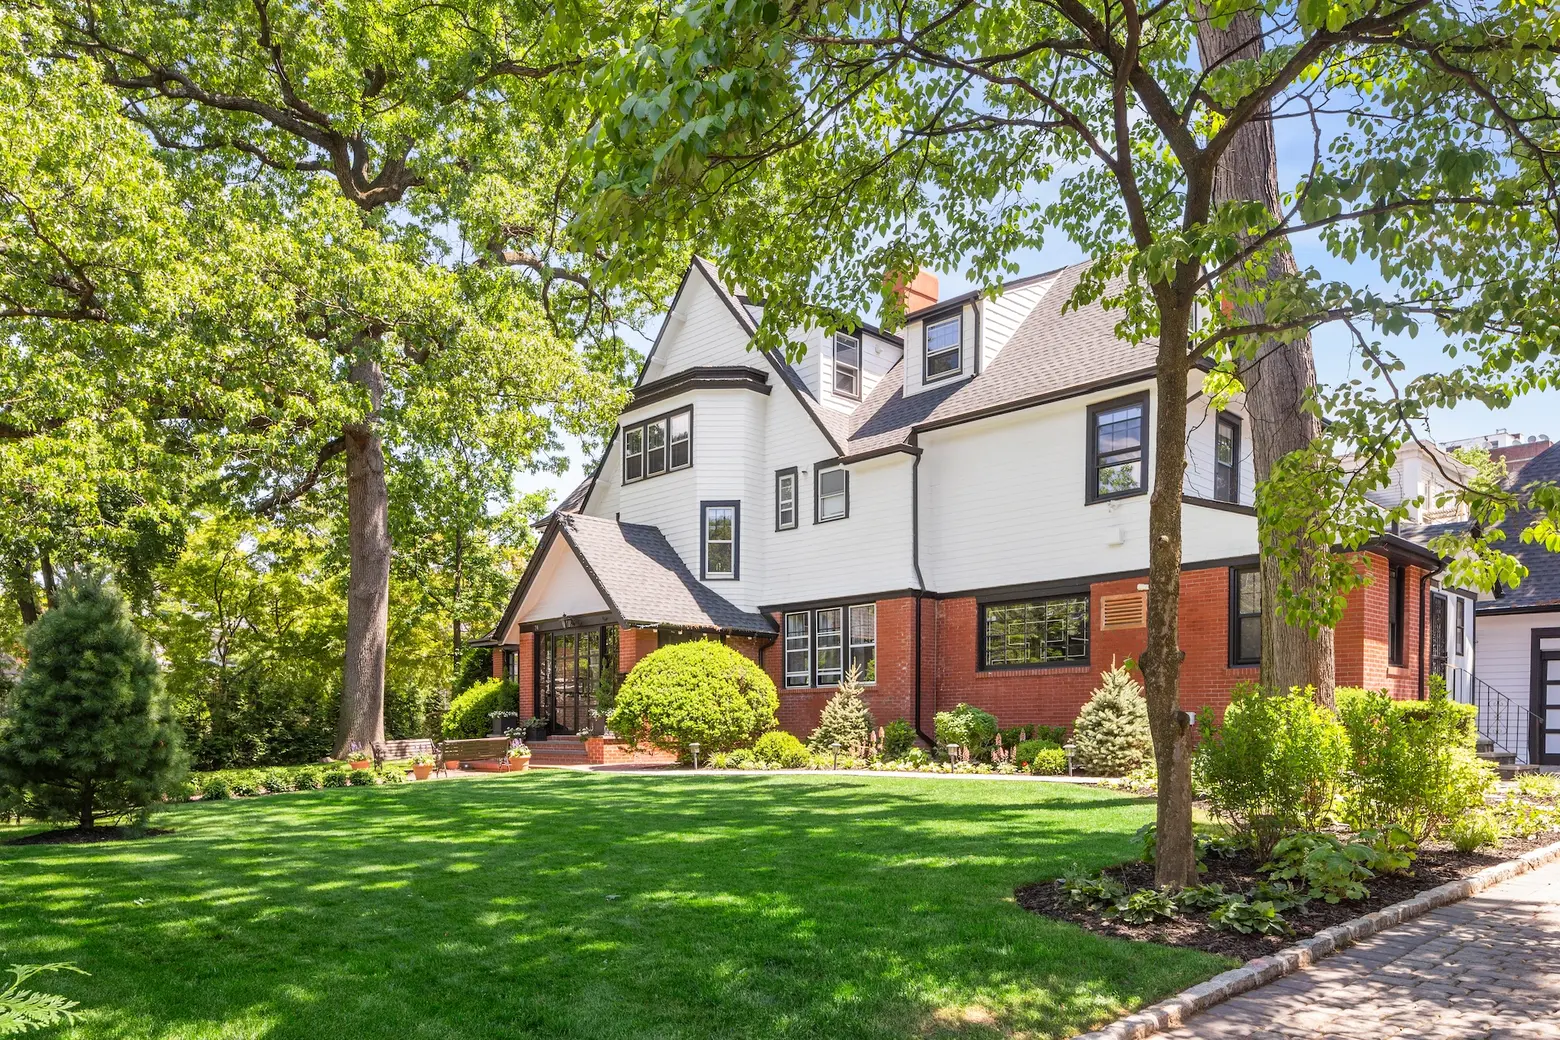 In the Fiske Terrace Historic District, this Colonial Revival house is impeccably modernized for $5M